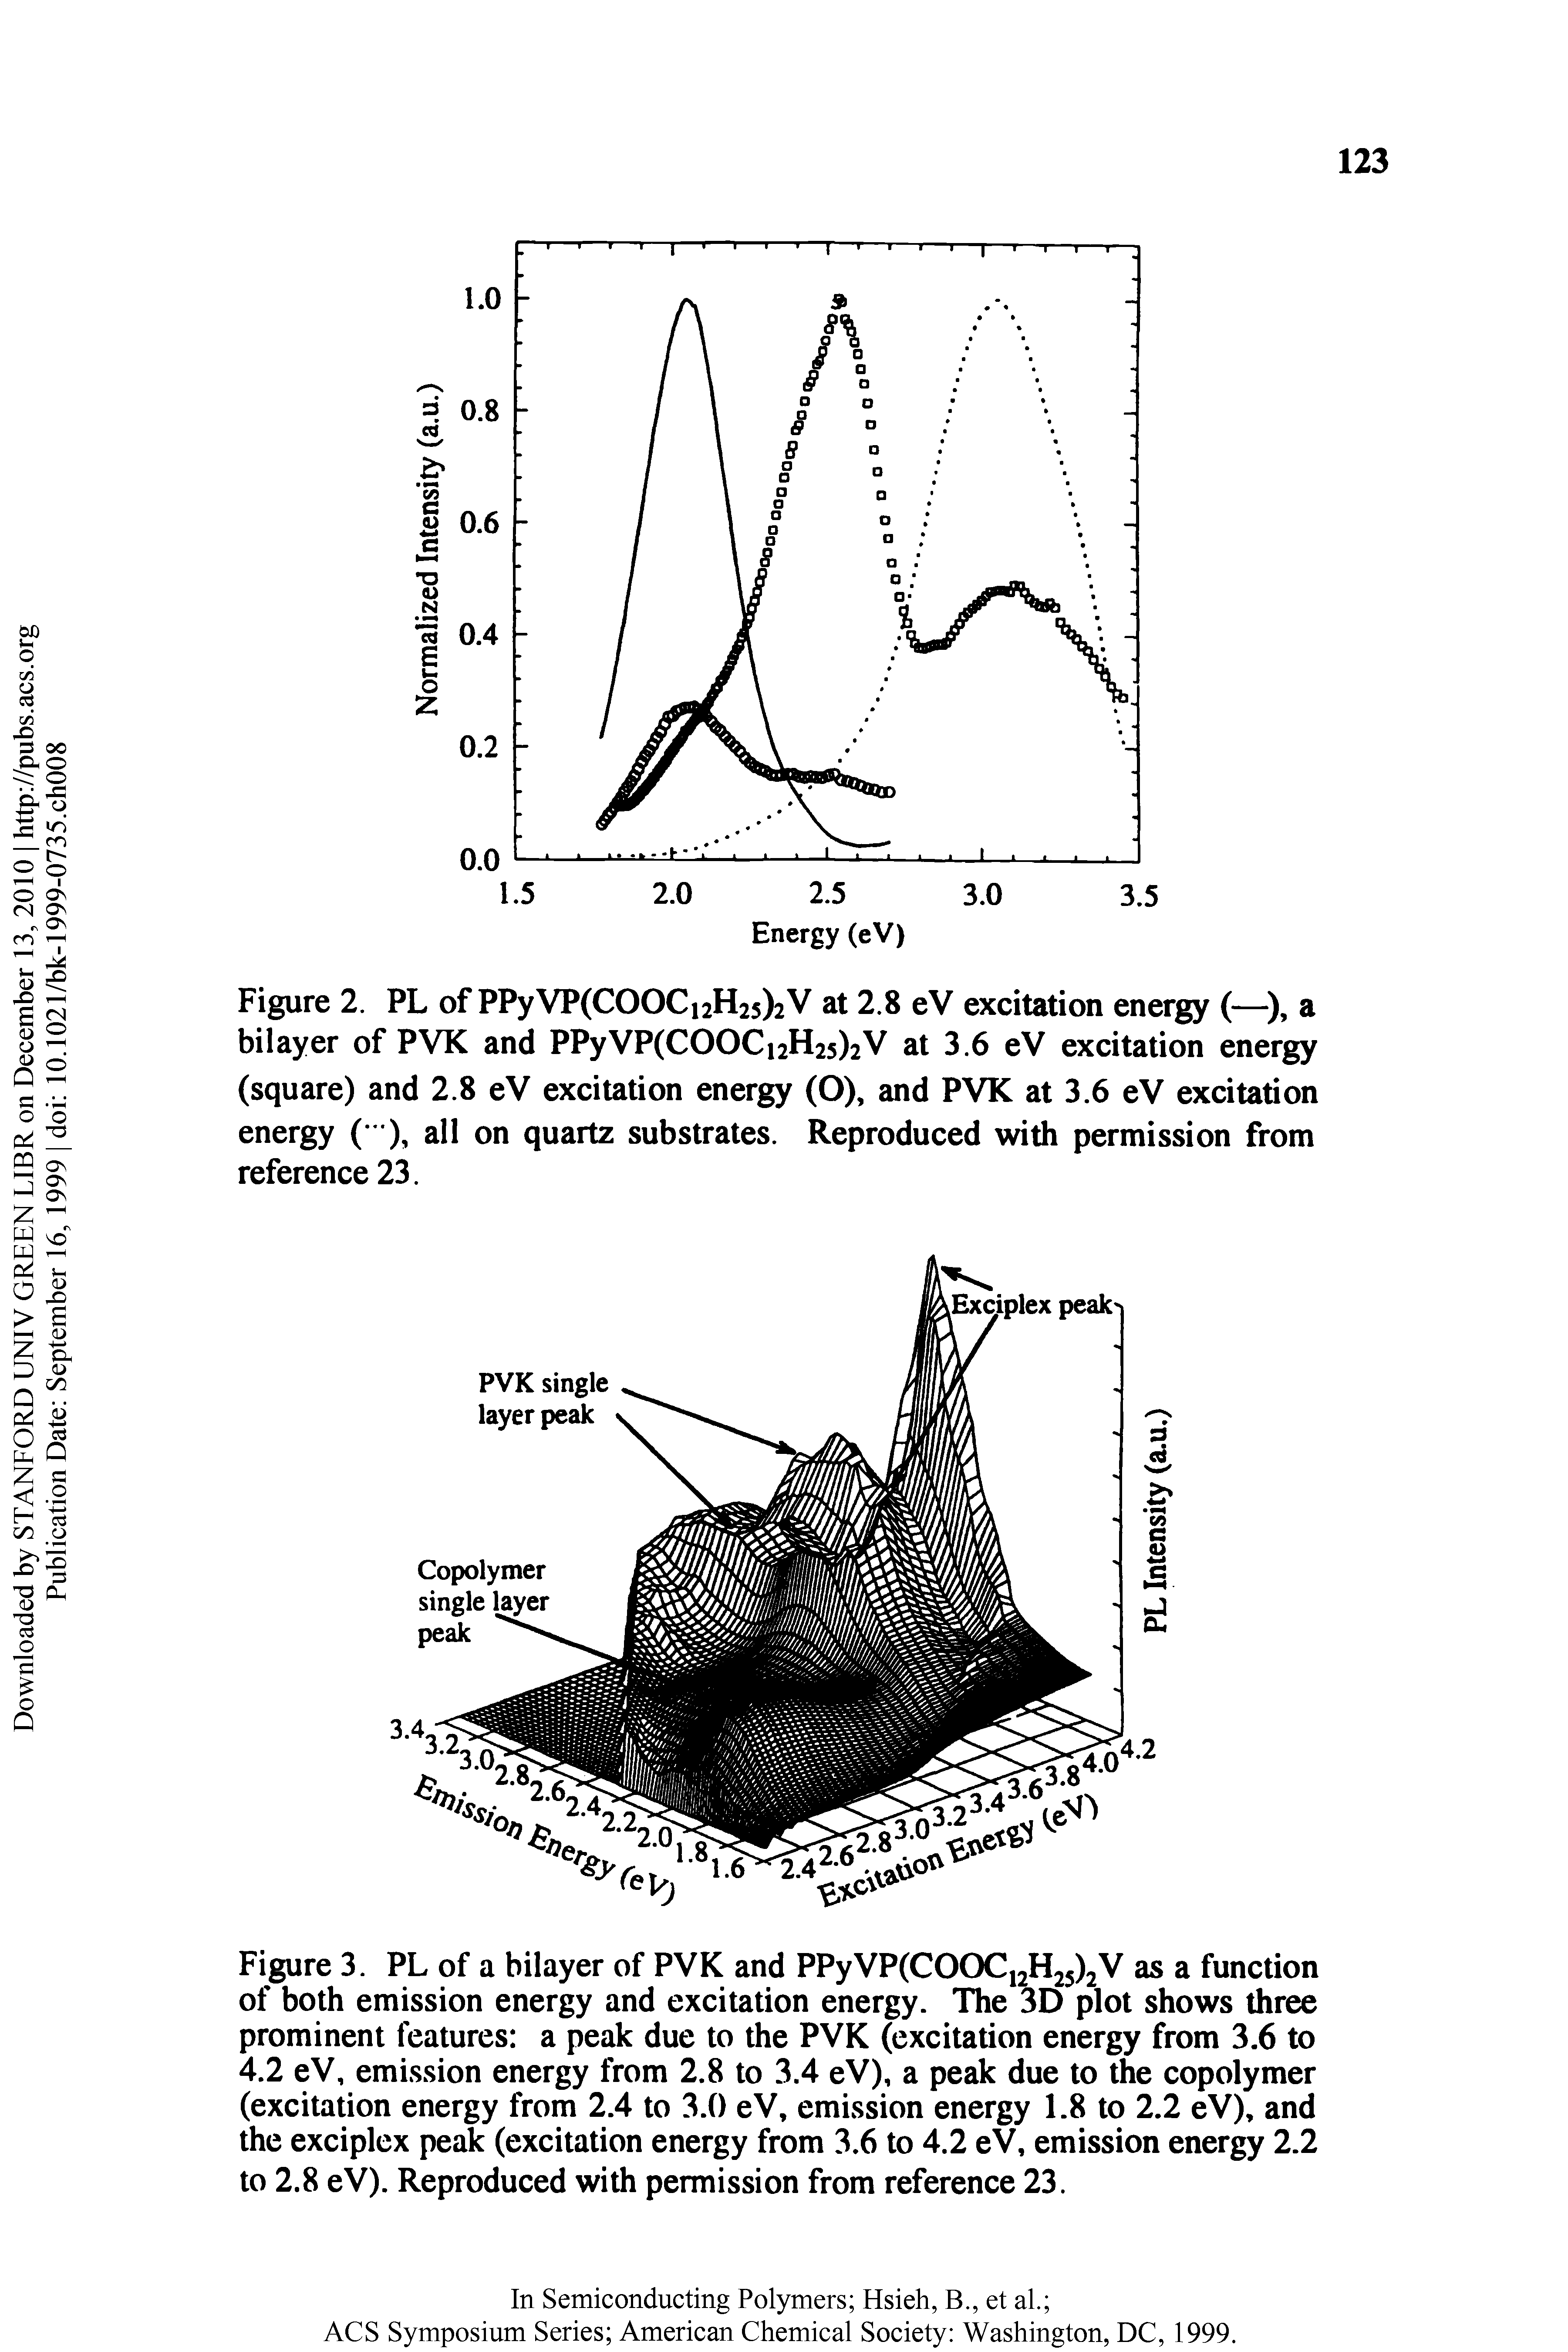 Figure 3. PL of a bilayer of PVK and PPyVP(CO(X i2H25)2V as a function of both emission energy and excitation energy. The 3D plot shows three prominent features a peak due to the PVK (excitation energy from 3.6 to 4.2 eV, emission energy from 2.8 to 3.4 eV), a peak due to the copolymer (excitation energy from 2.4 to 3.0 eV, emission energy 1.8 to 2.2 eV), and the exciplex peak (excitation energy from 3.6 to 4.2 eV, emission energy 2.2 to 2.8 eV). Reproduced with permission from reference 23.